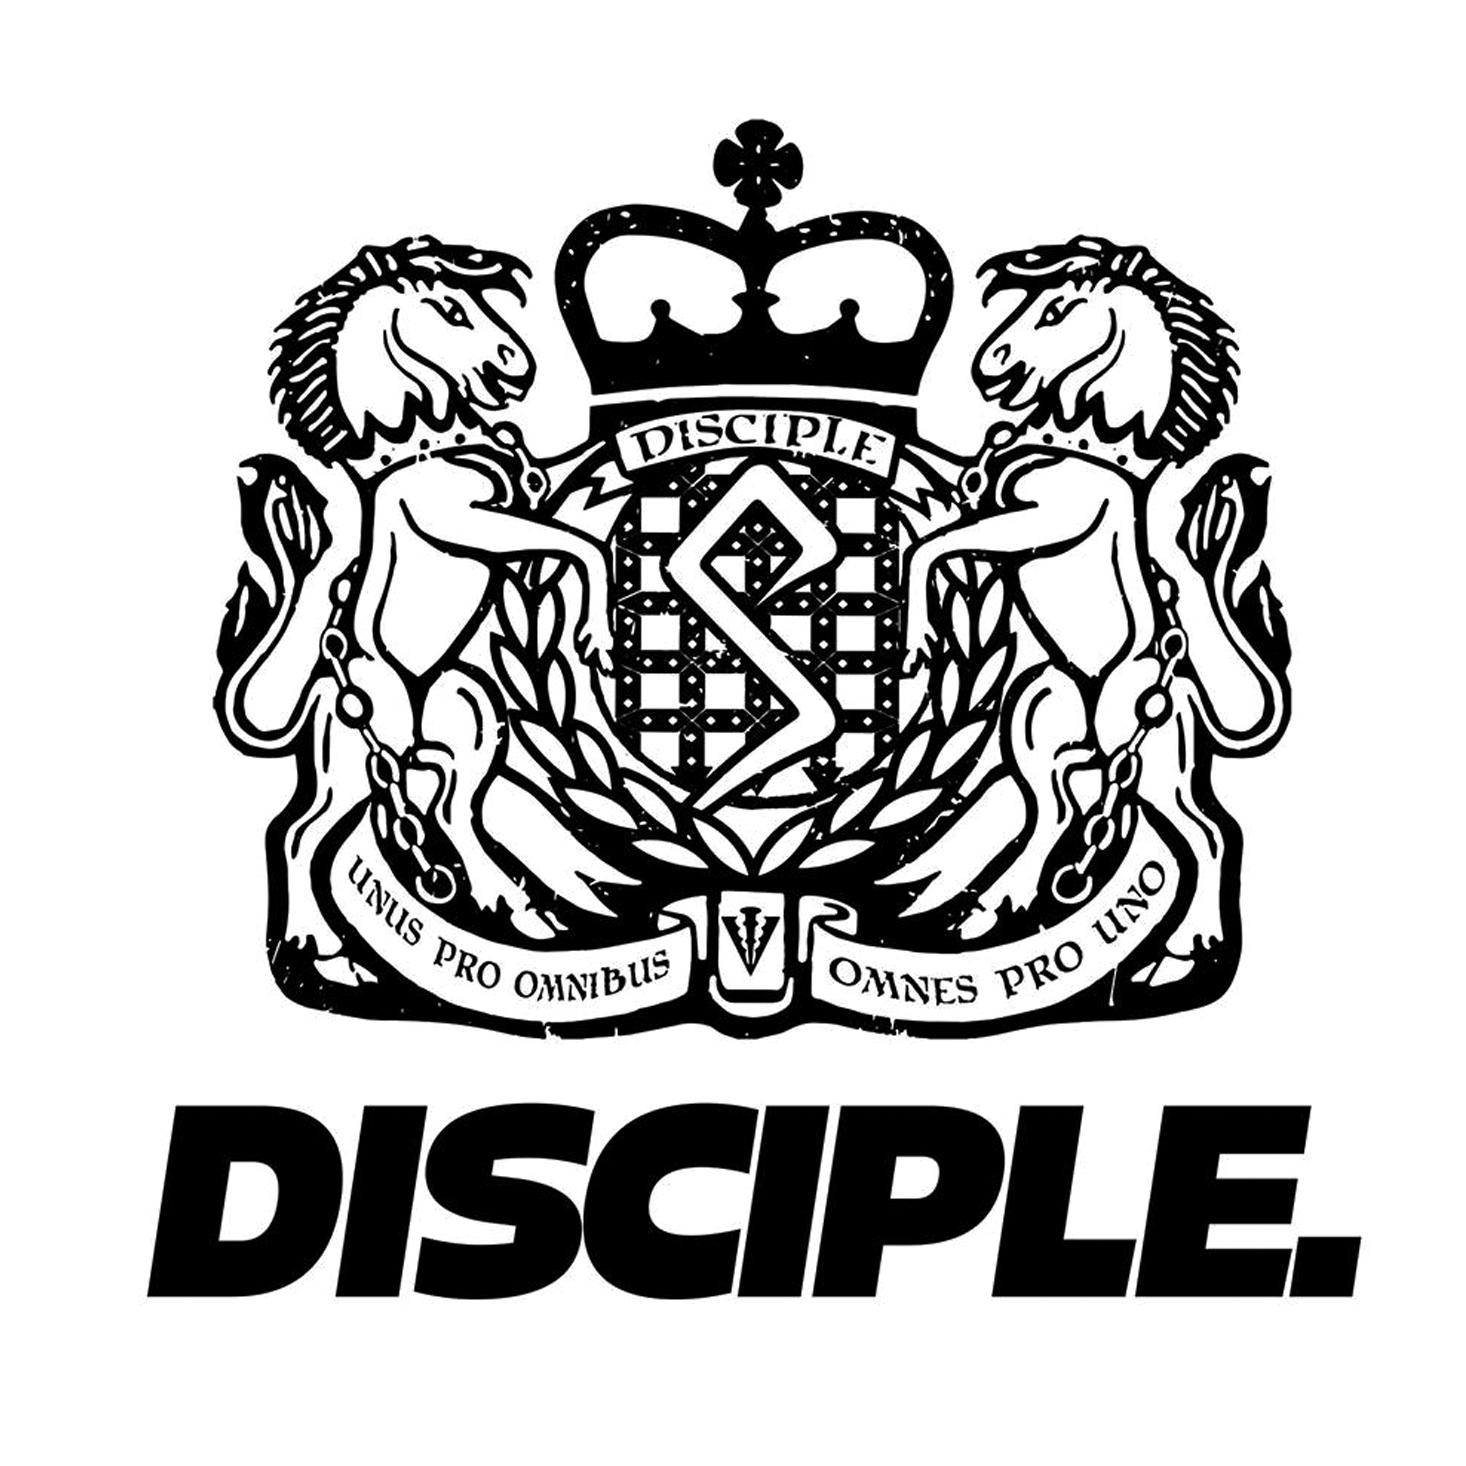 Disciple Dubstep Logo - MB Artists - MB Artists Agency offers an exciting artist roster with ...